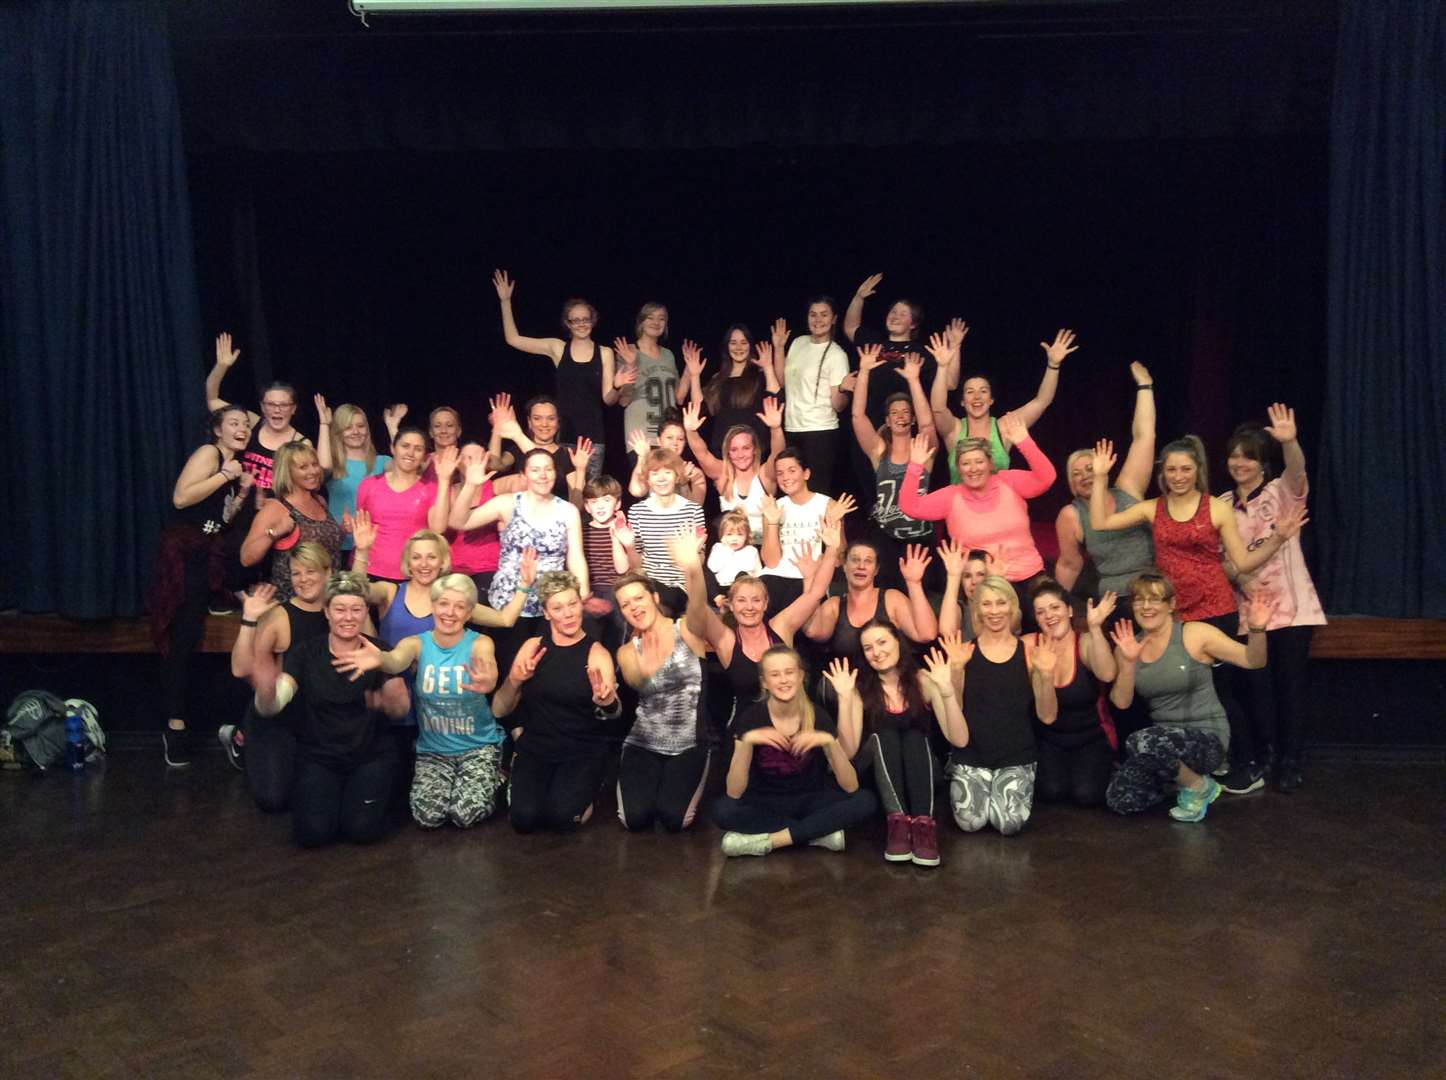 Aerobics was a fun way to raise cash for a trip to India with the Gerry Martin Project